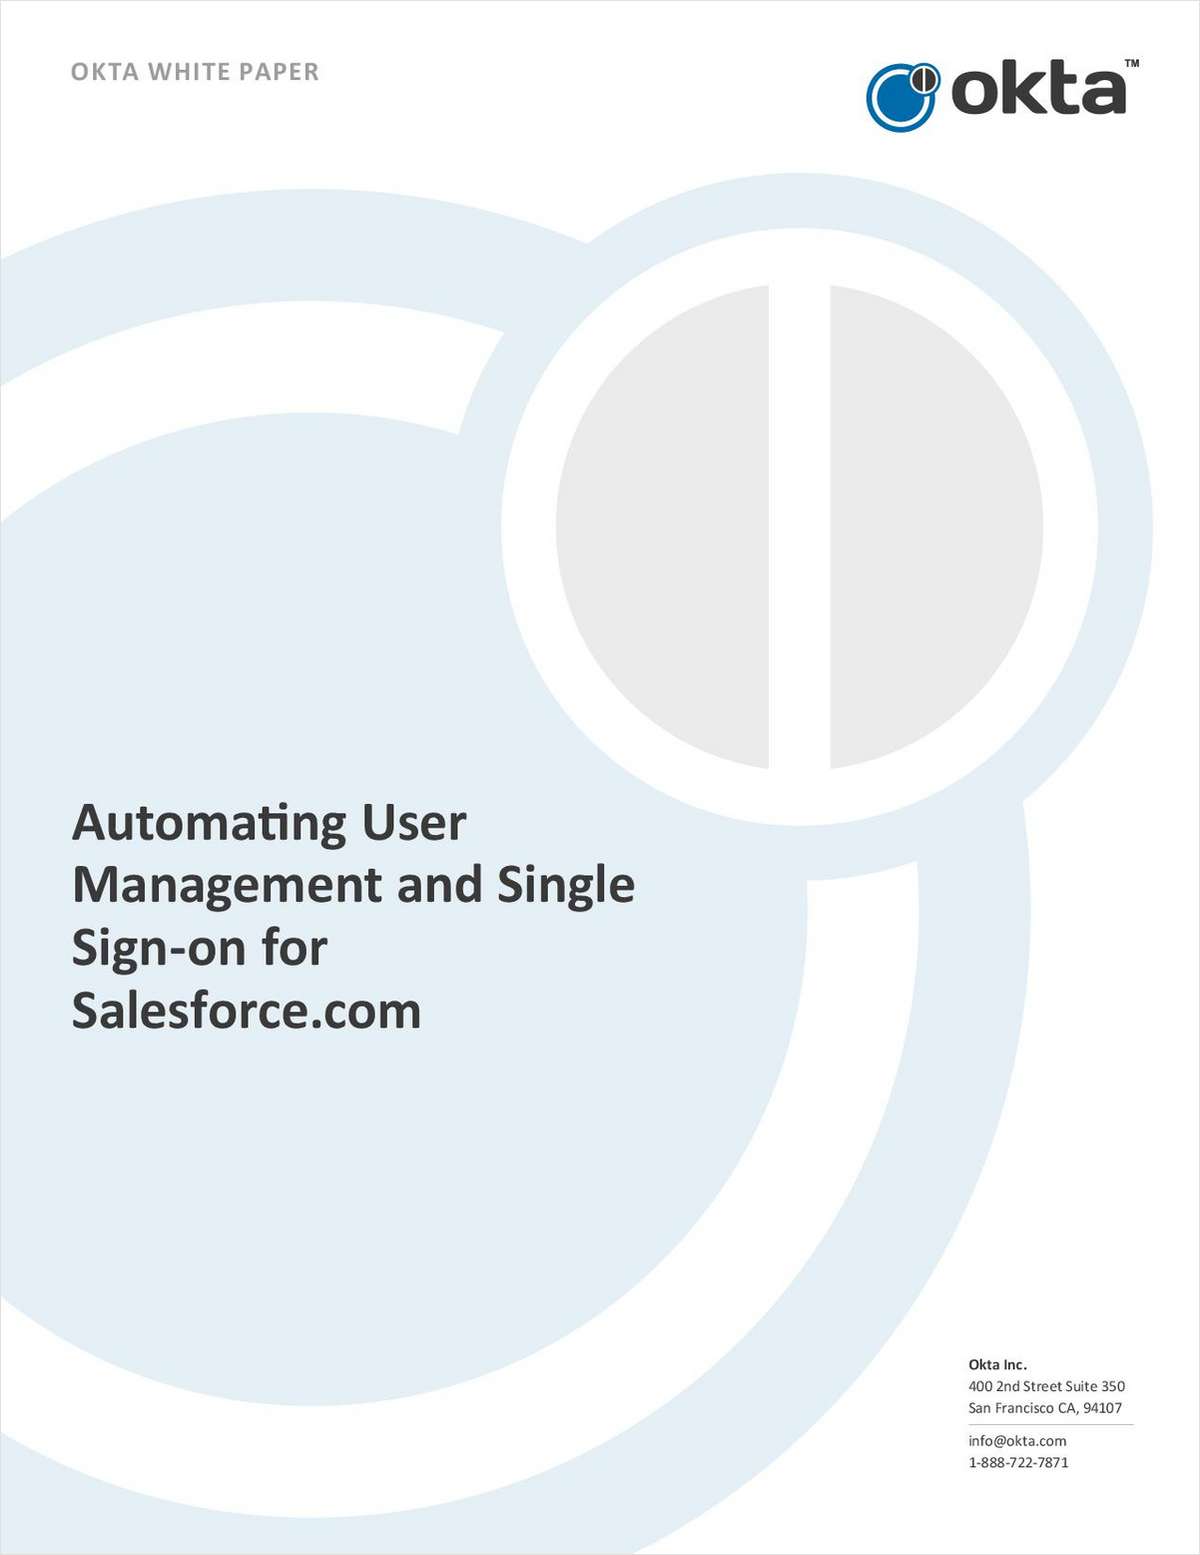 Automating User Management and Single Sign-on for Salesforce.com